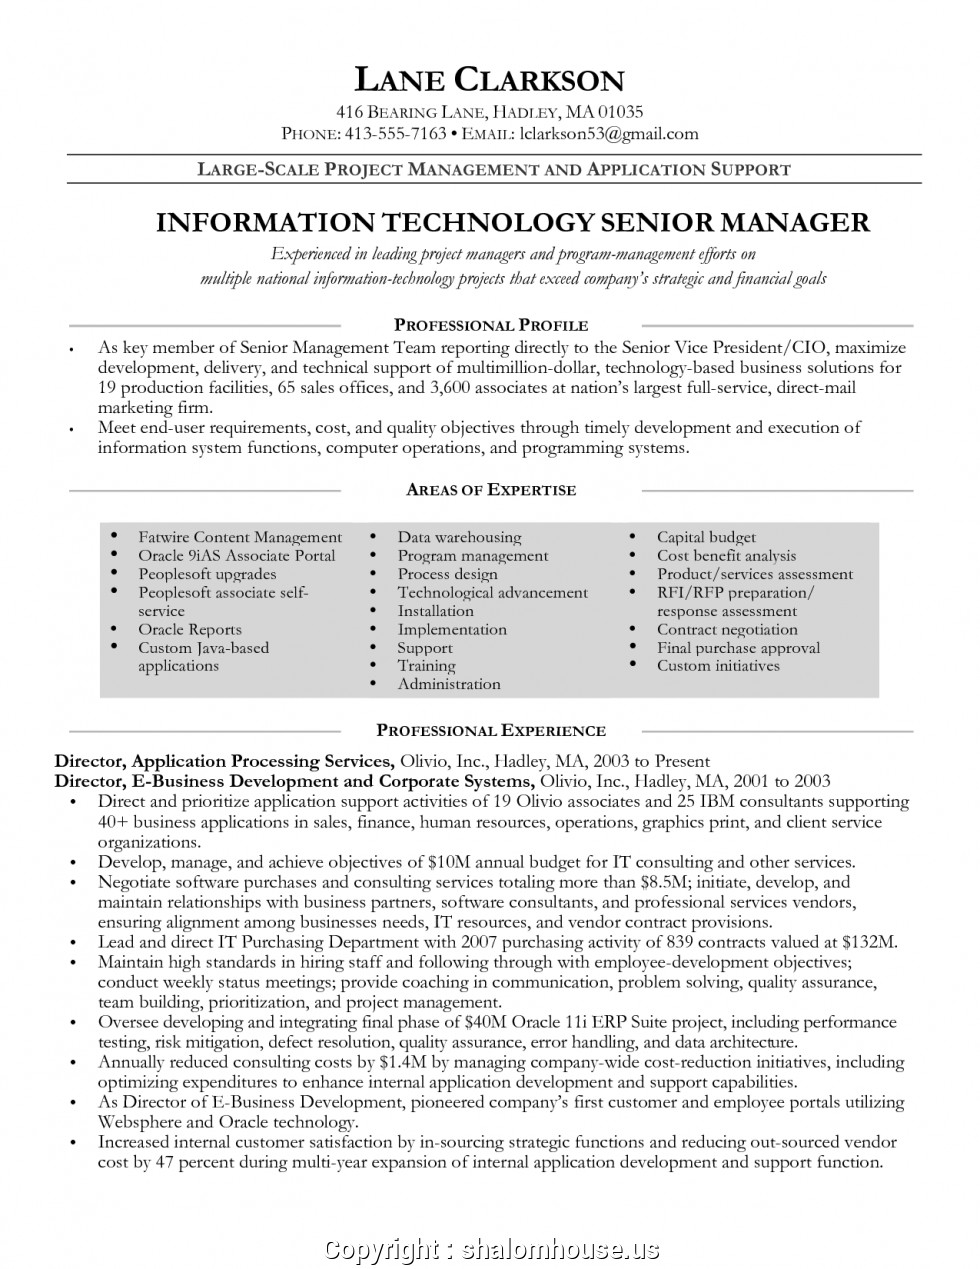 Entry Level Project Manager Sample Resume Unique Entry Level Project Manager Resume Sample